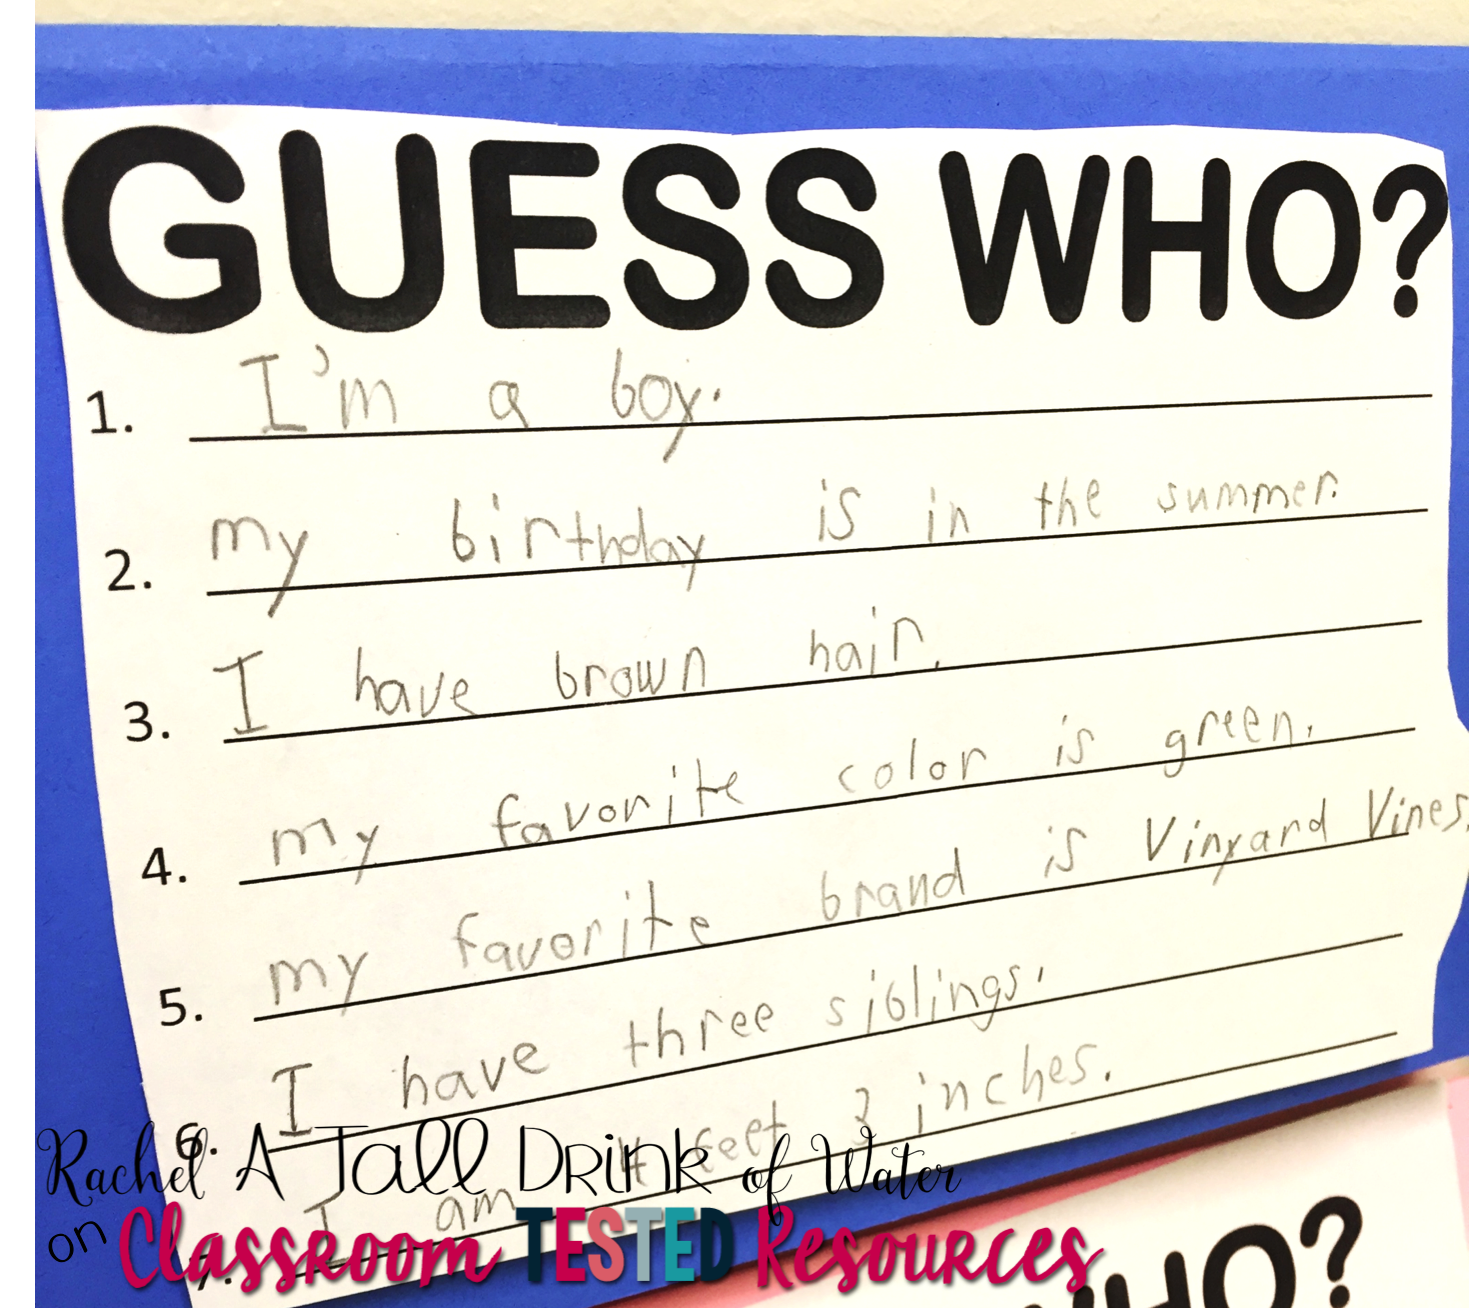 Guess Who? Open House Writing Idea | Classroom Resources